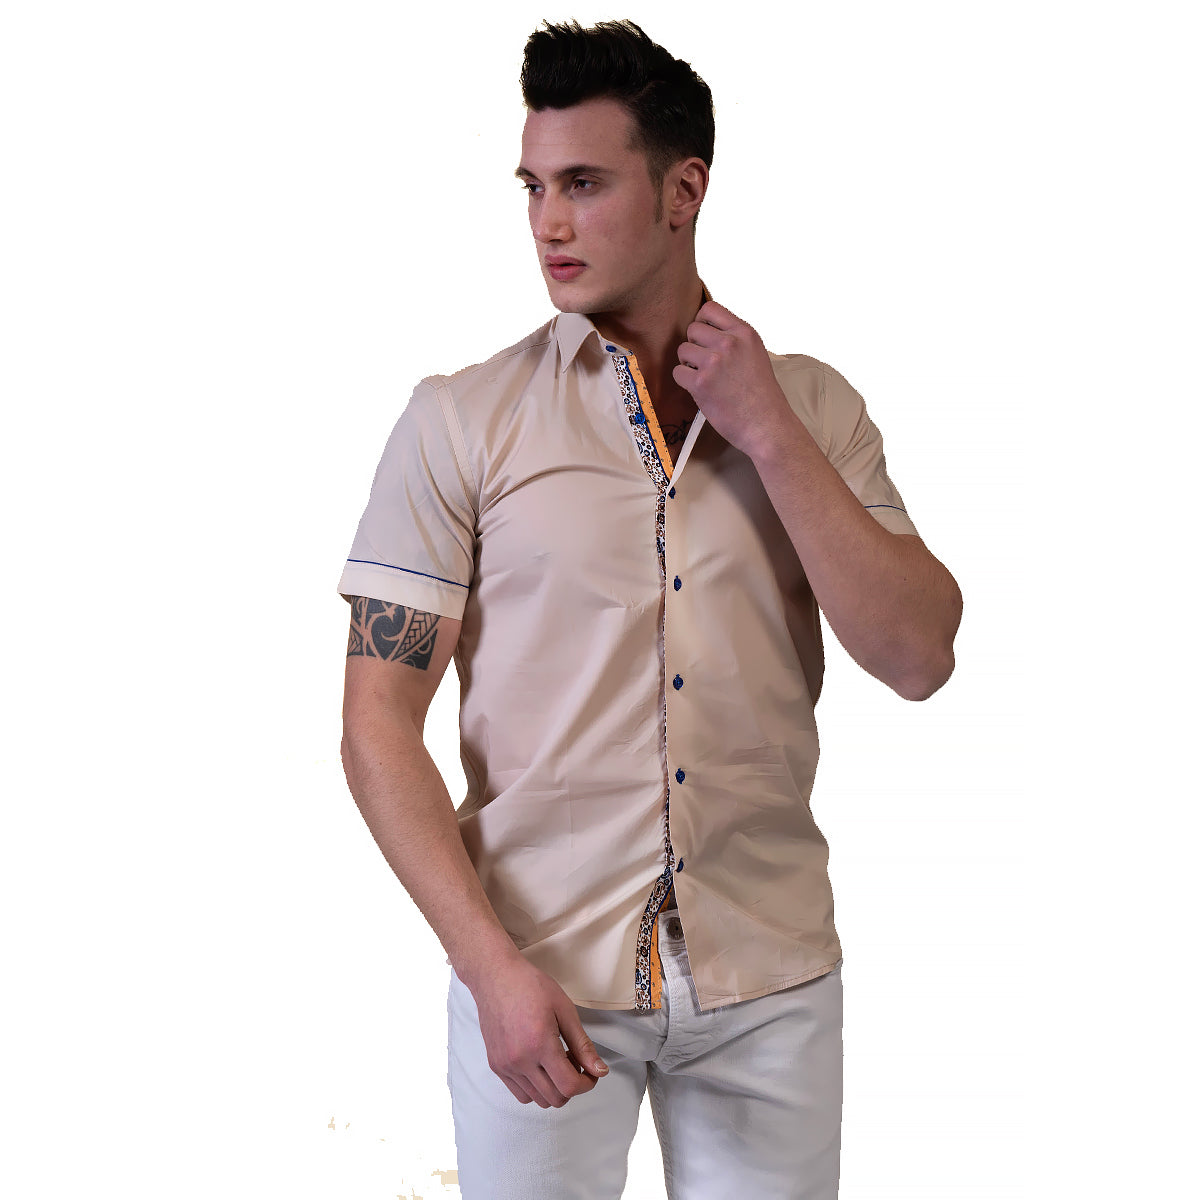 Beige Mens Short Sleeve Button up Shirts - Tailored Slim Fit Cotton Dress Shirts